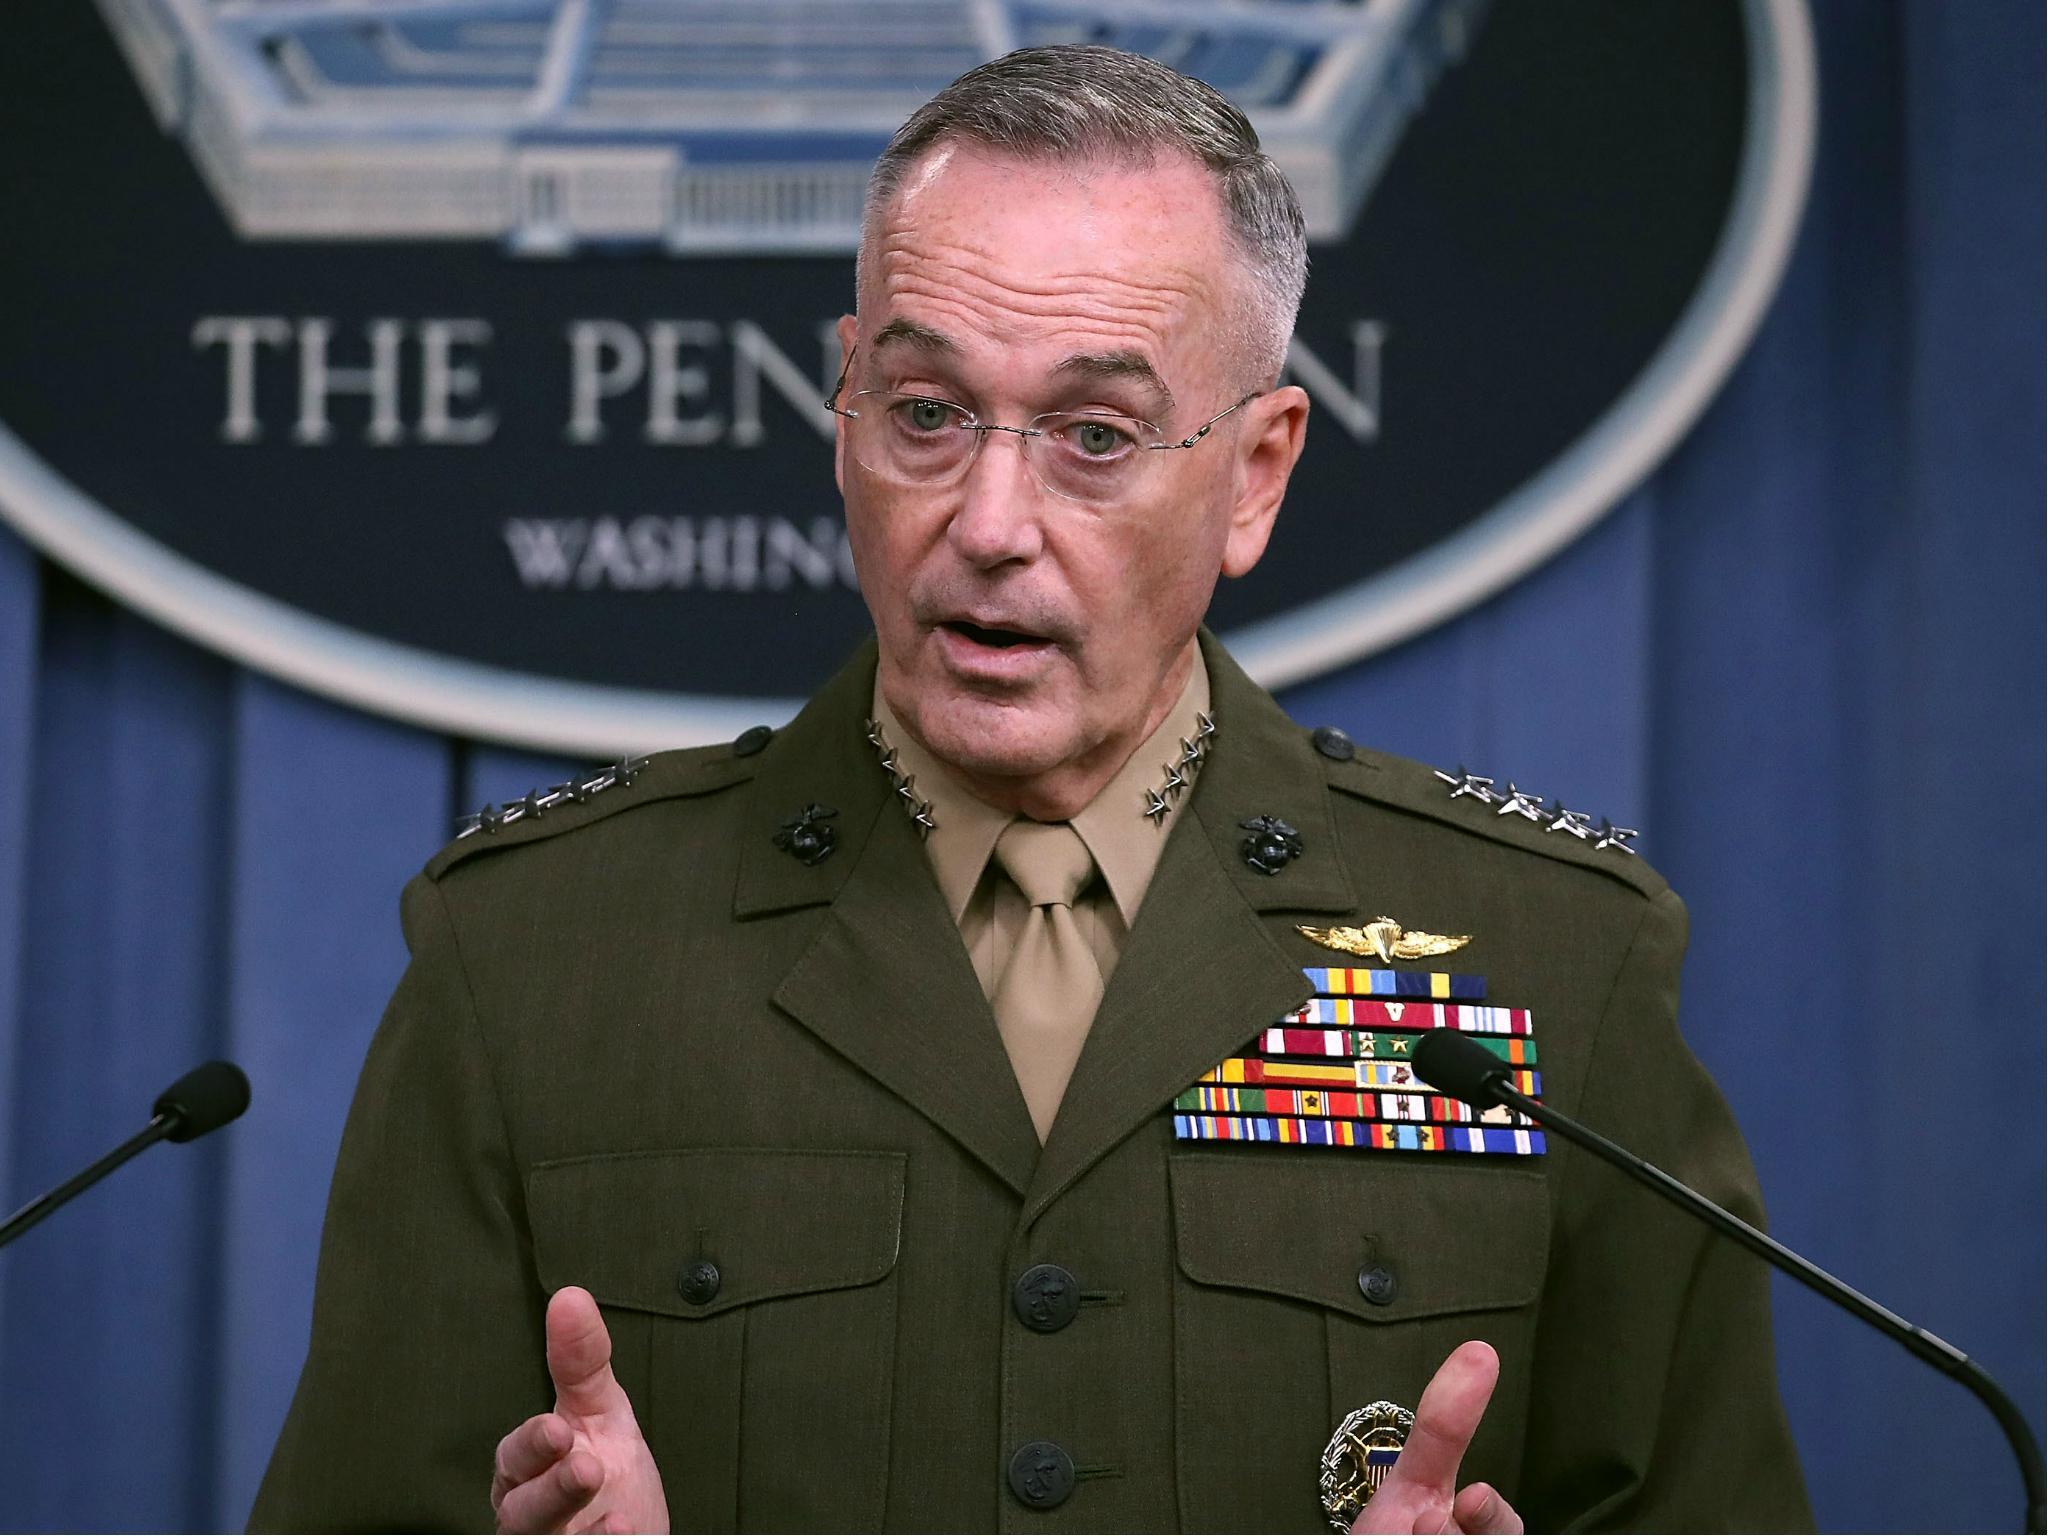 General Joseph Dunford, Chairman of the Joint Chiefs of Staff, briefs the media on the recent military operations in Niger, at the Pentagon on 23 October.